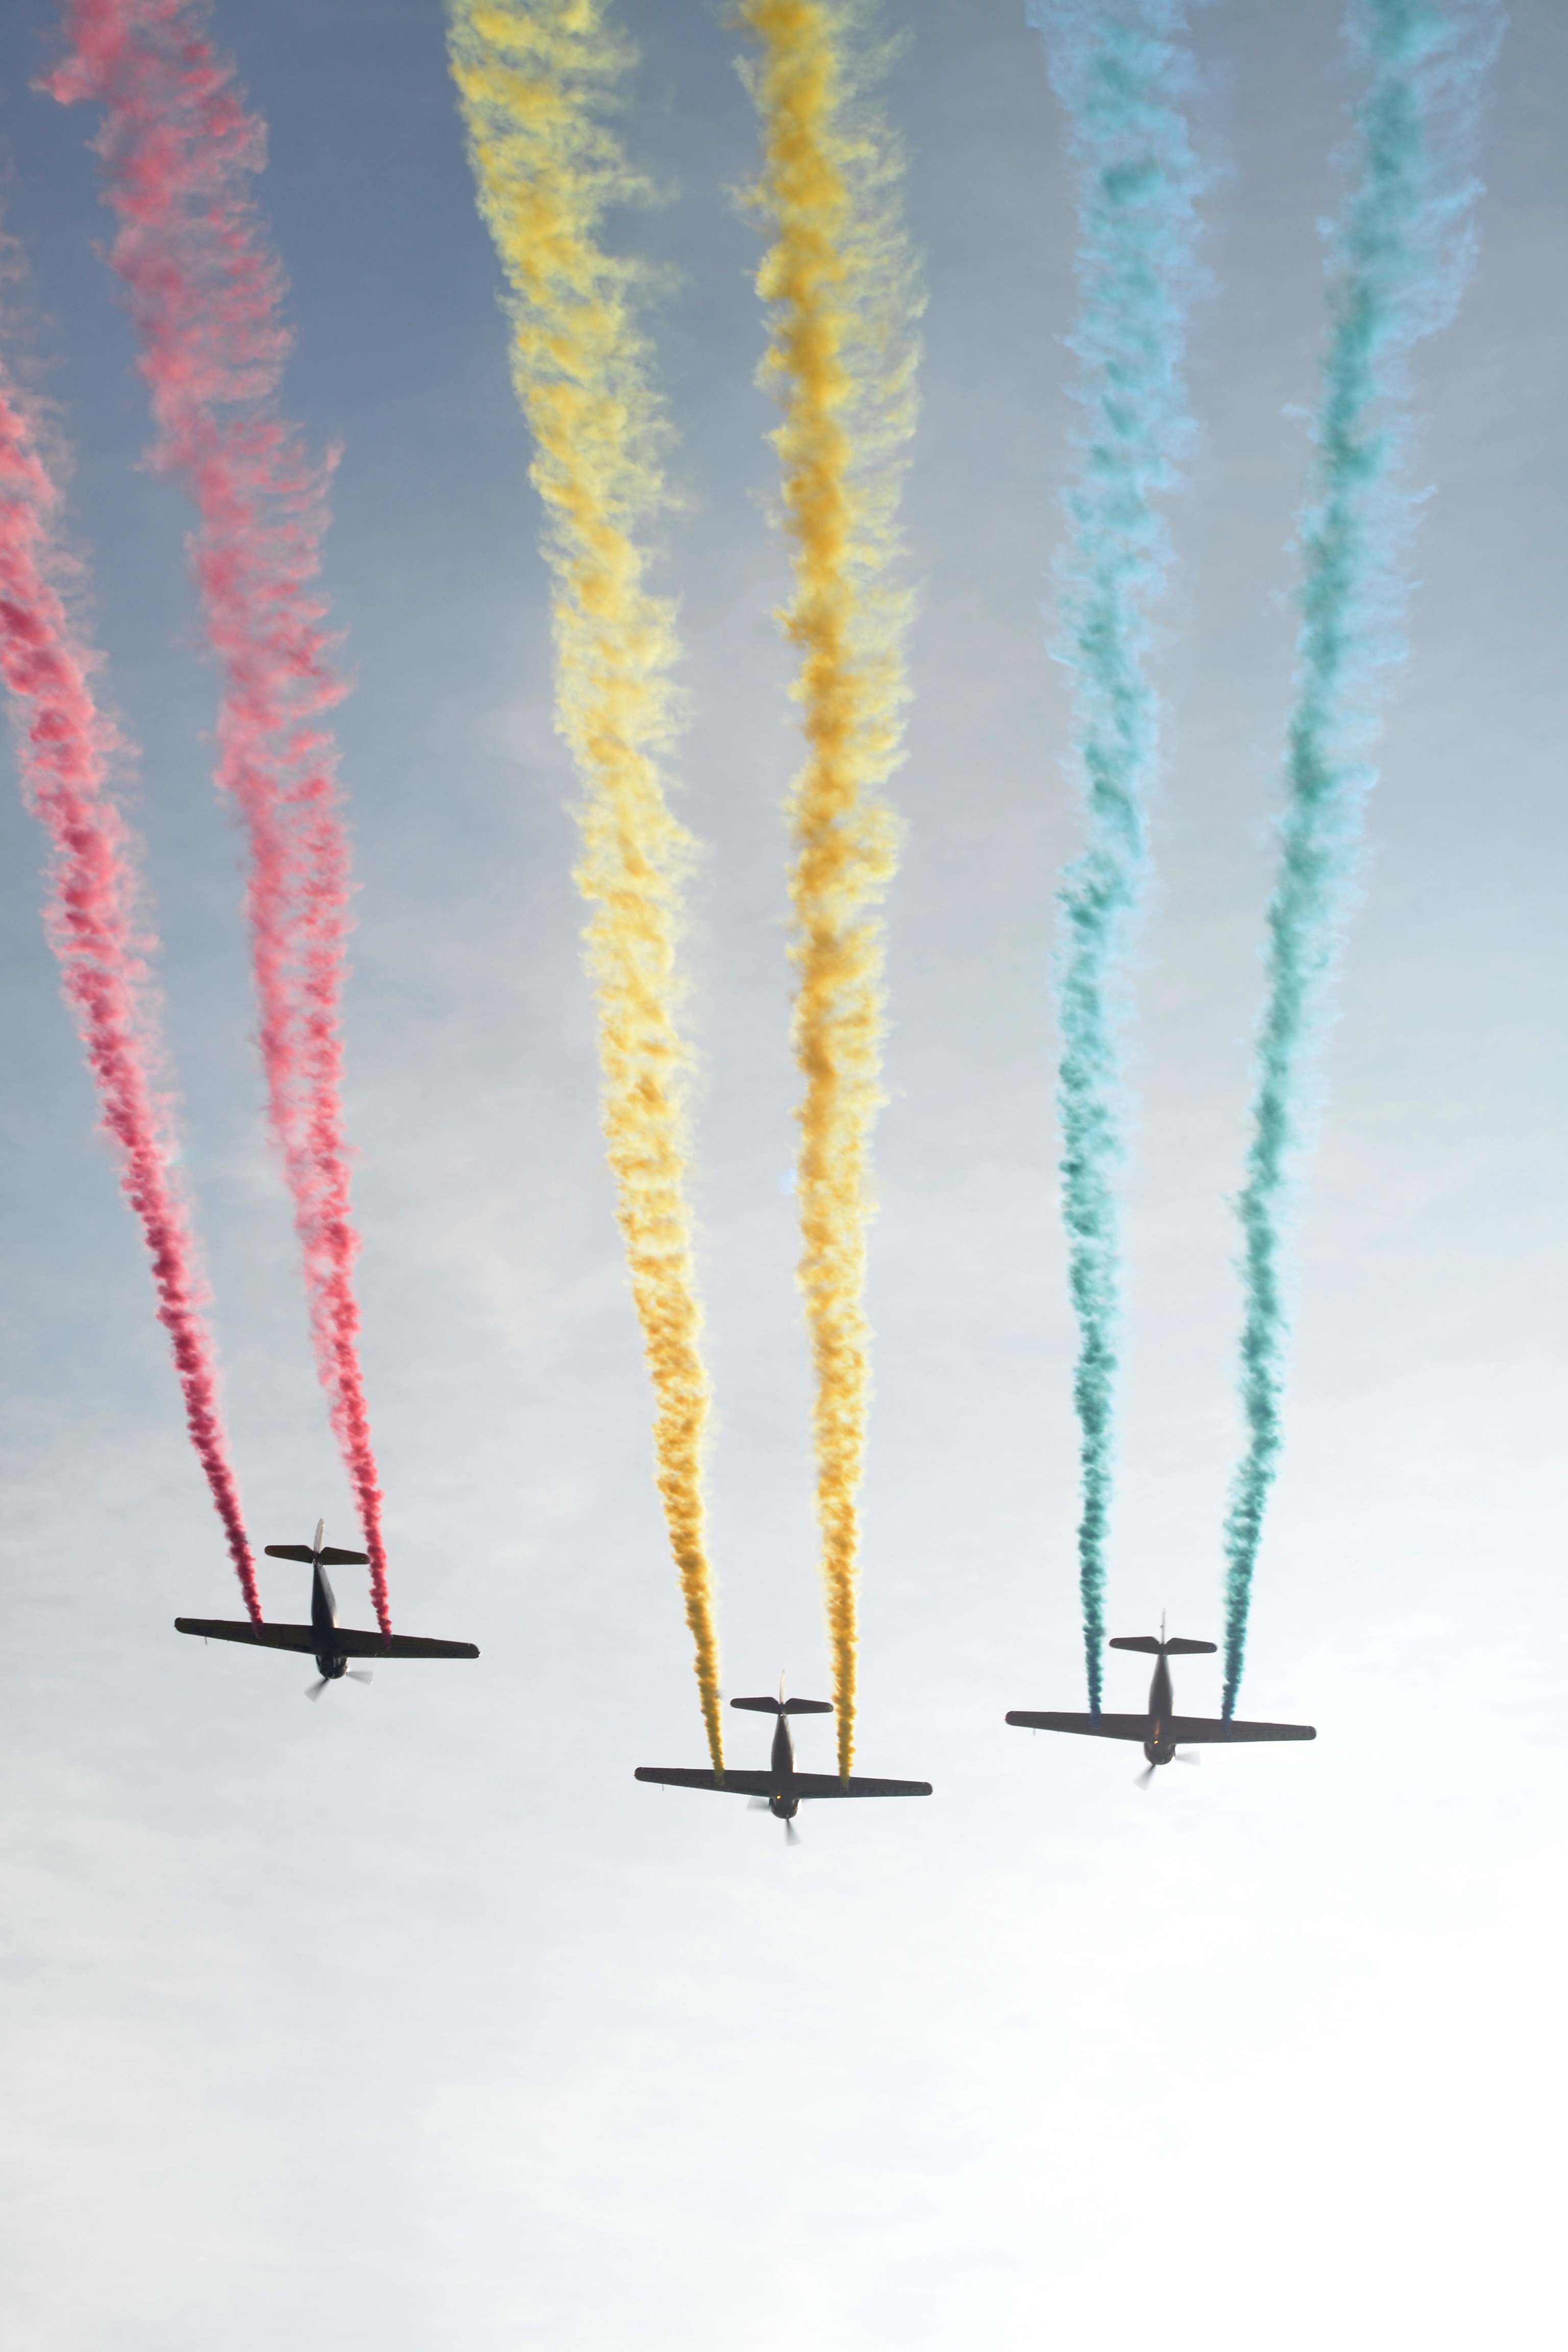 three airplanes discharging red yellow and blue smokes in air during daytime